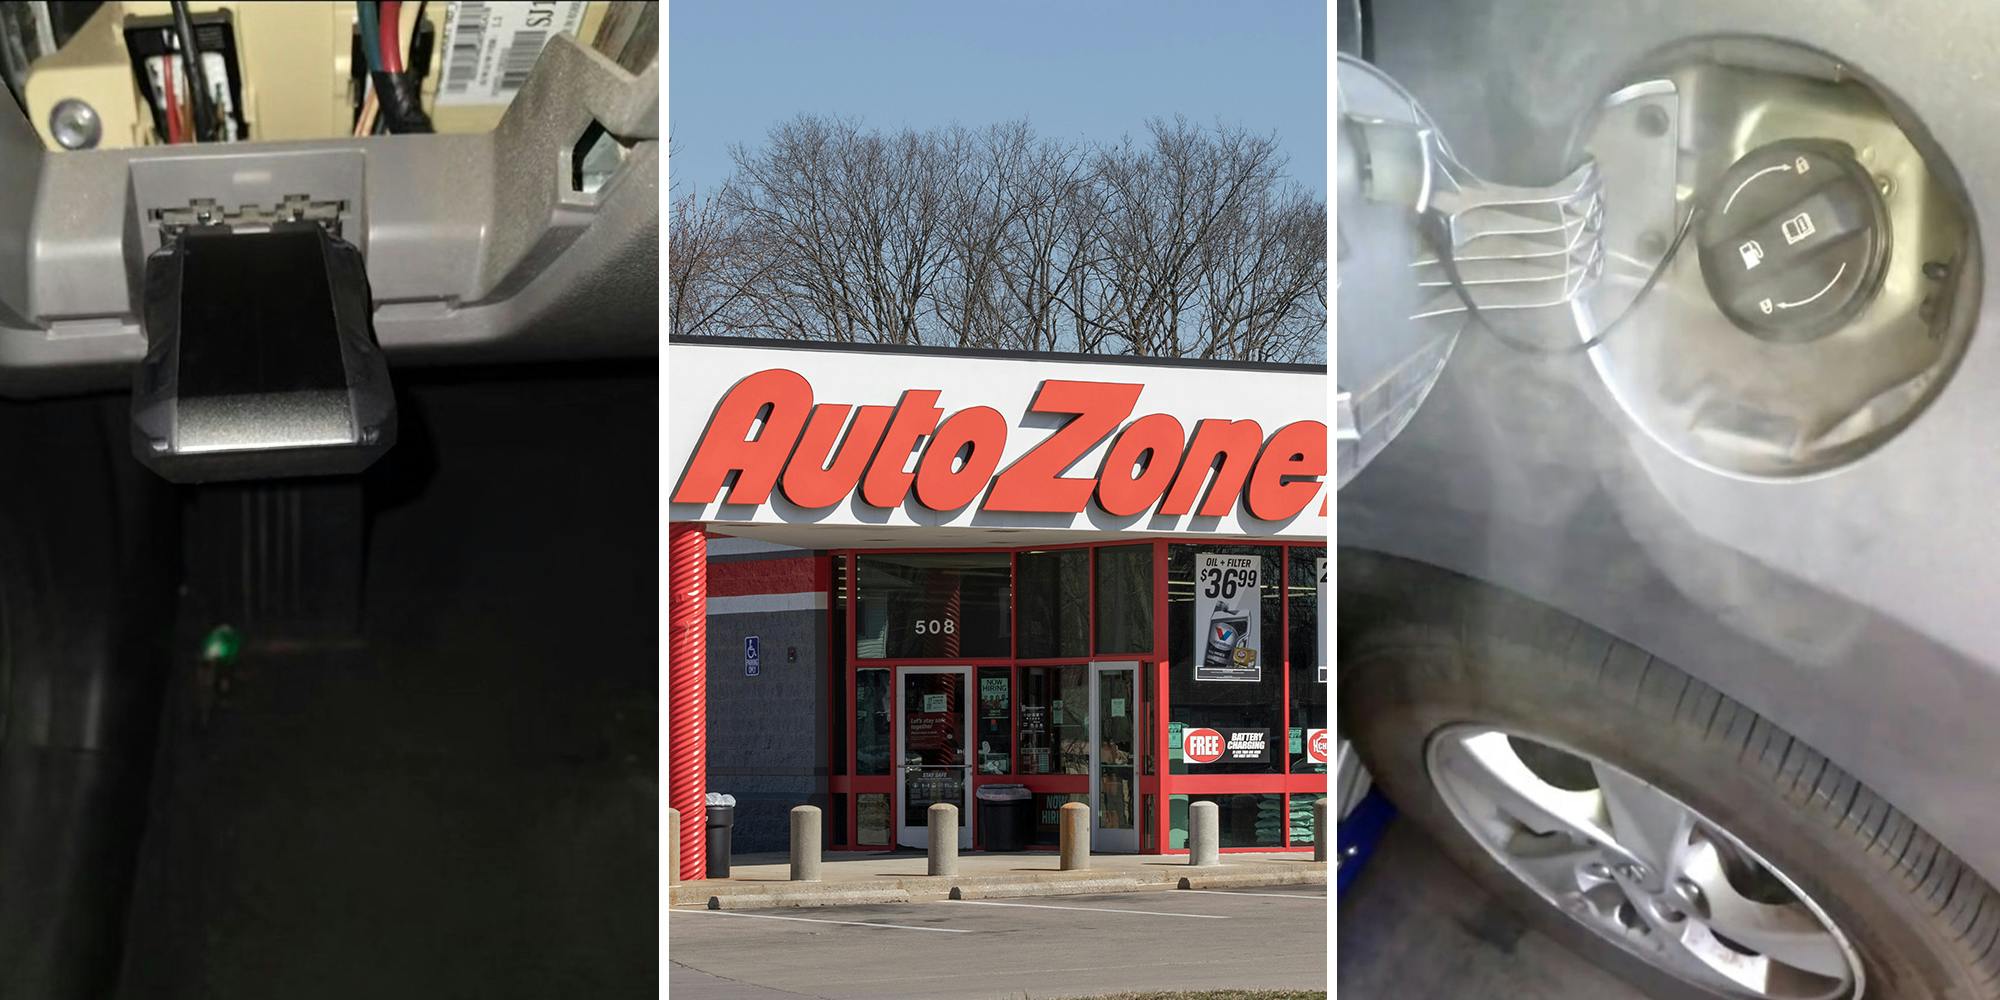 Mechanic issues warning about getting car diagnosed at AutoZone